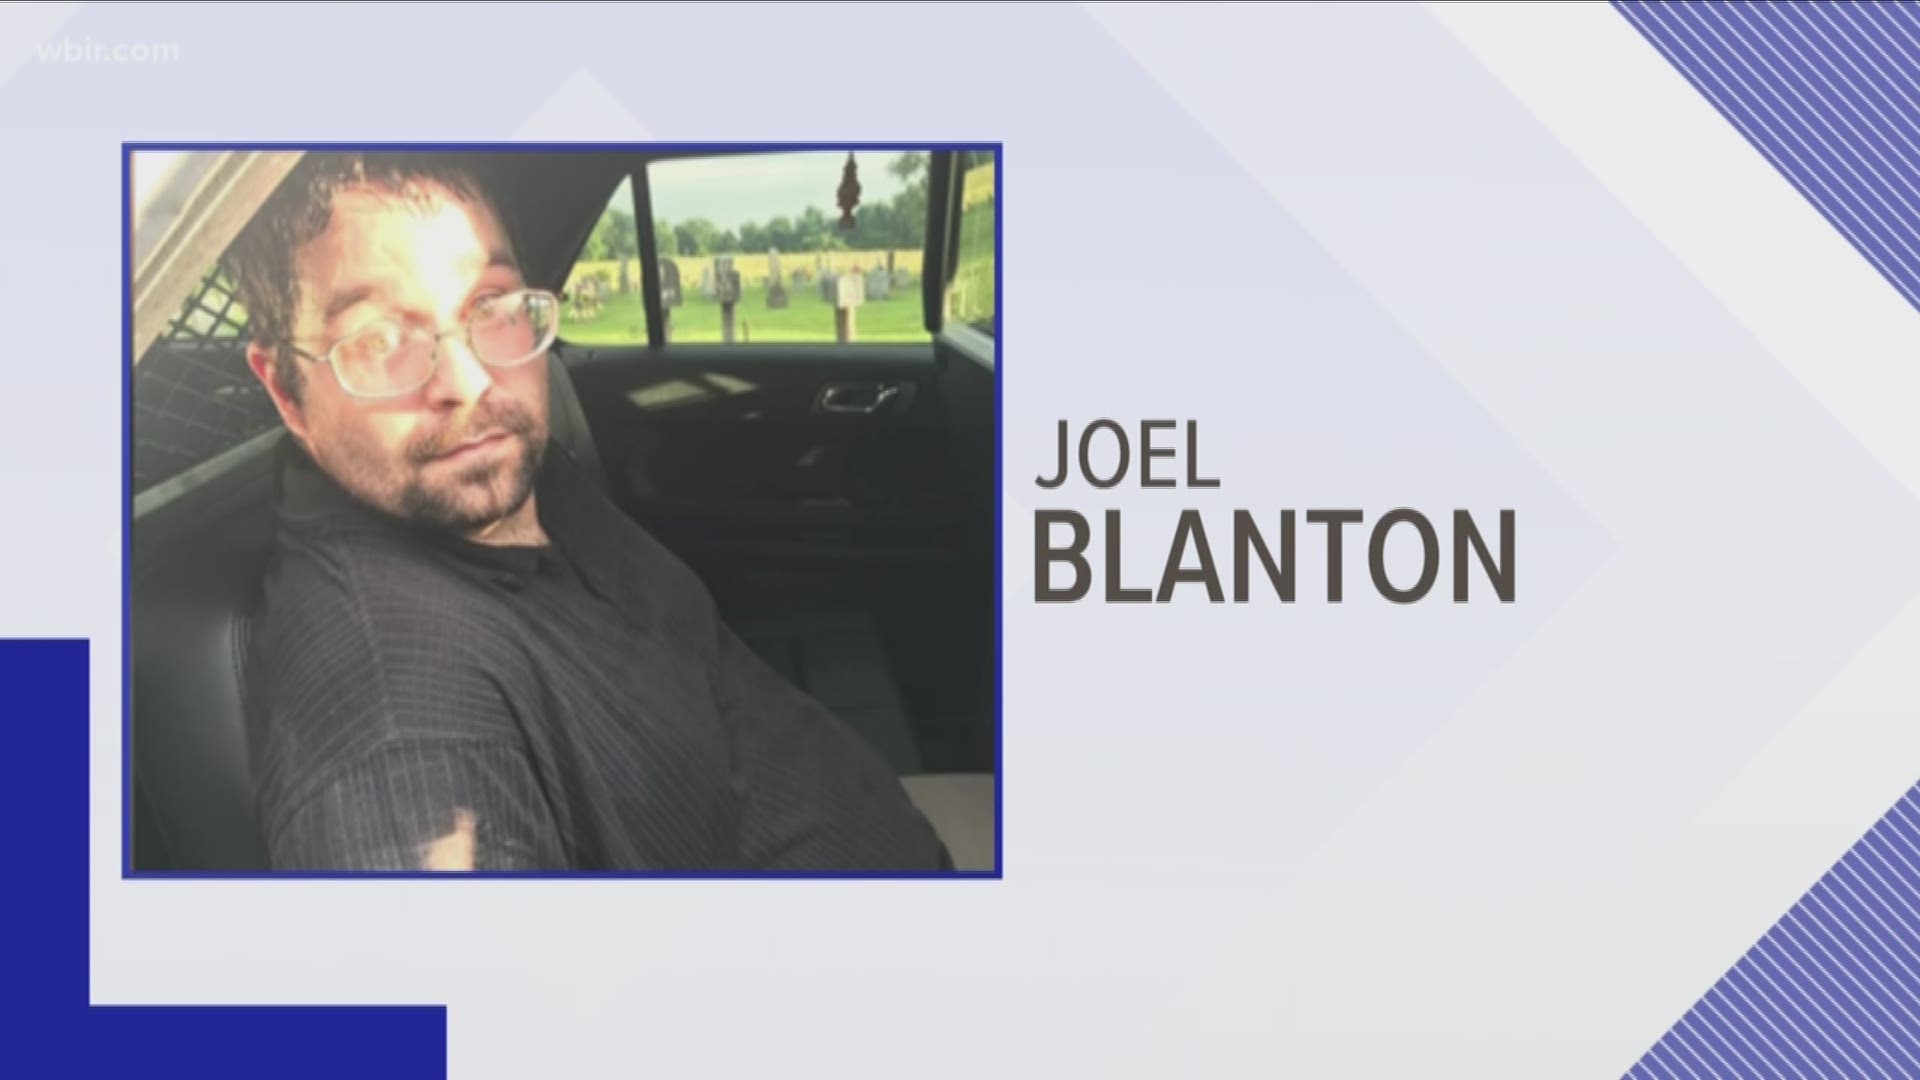 Joel Ernest Blanton, 37, was wanted by the Van Buren County Sheriff's Department and the TBI after investigators said he escaped from the Van Buren County Jail around 1 a.m. Monday.